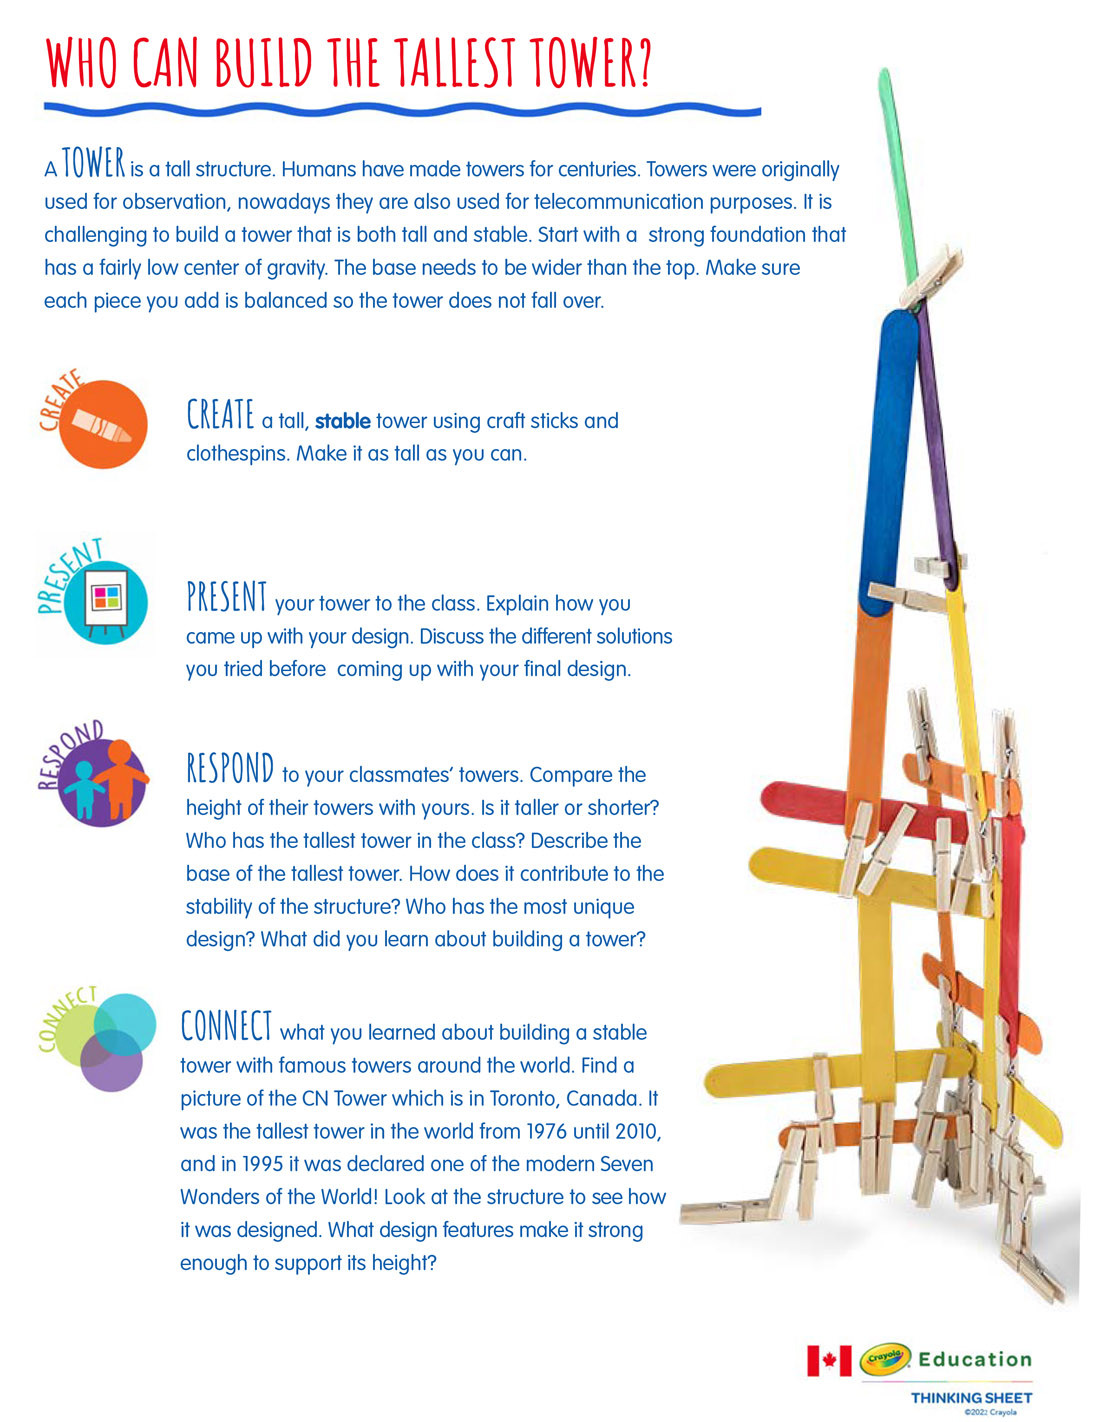 Who Can Build The Tallest Tower?